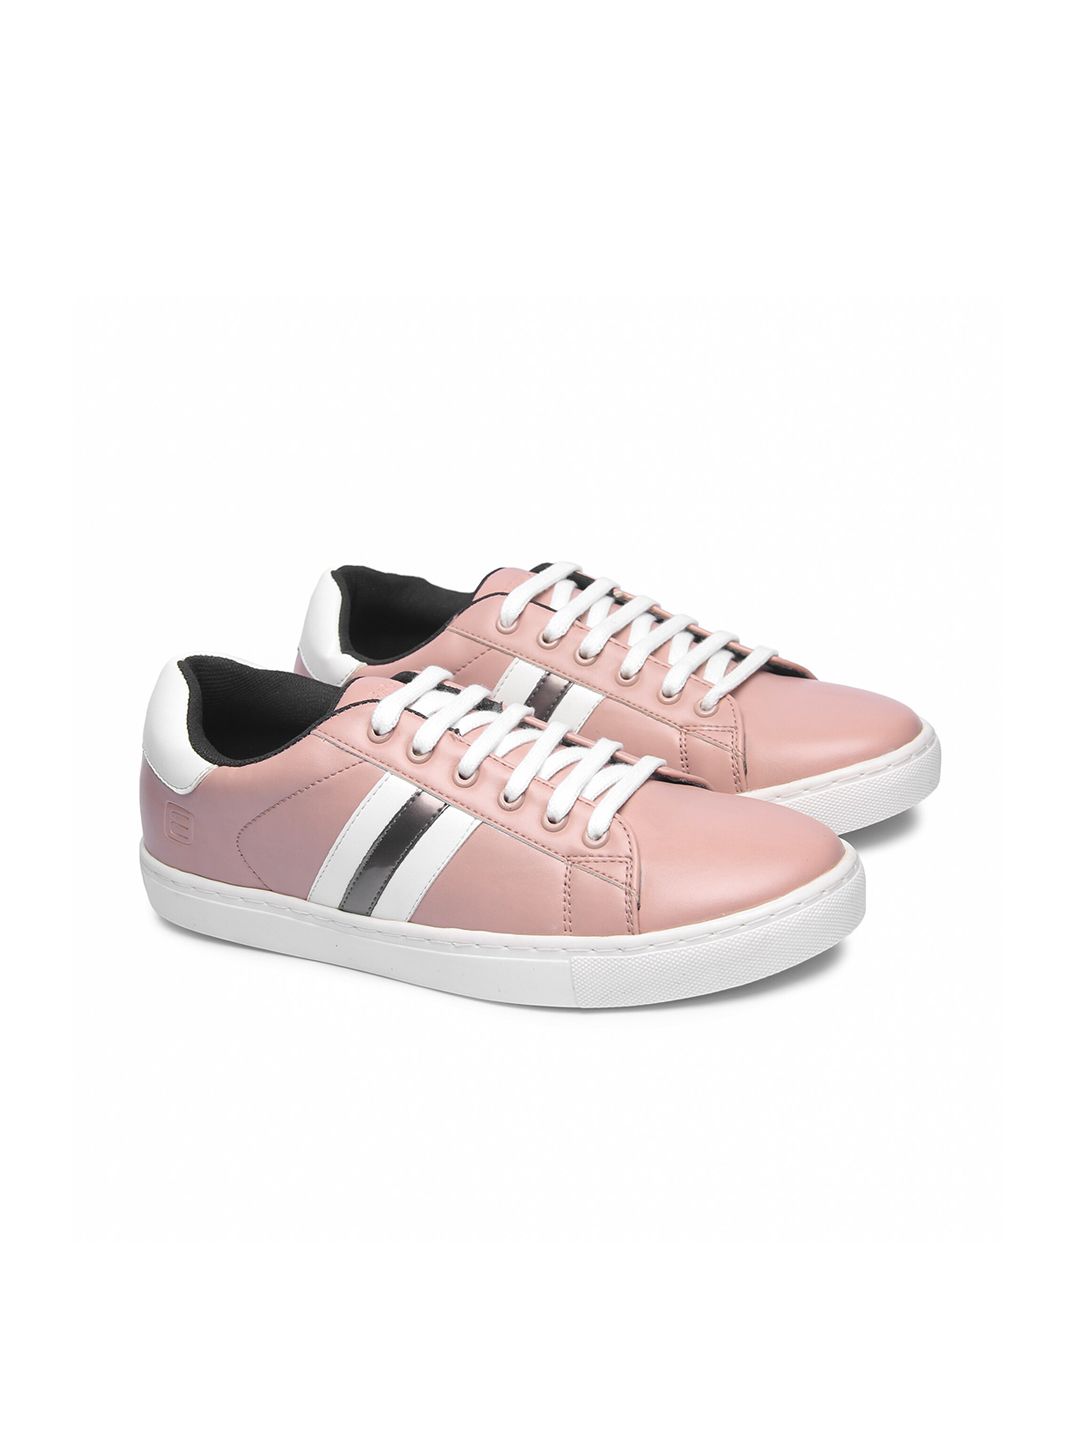 Lancer Women Pink Striped Waterproof Lined Sneakers Price in India